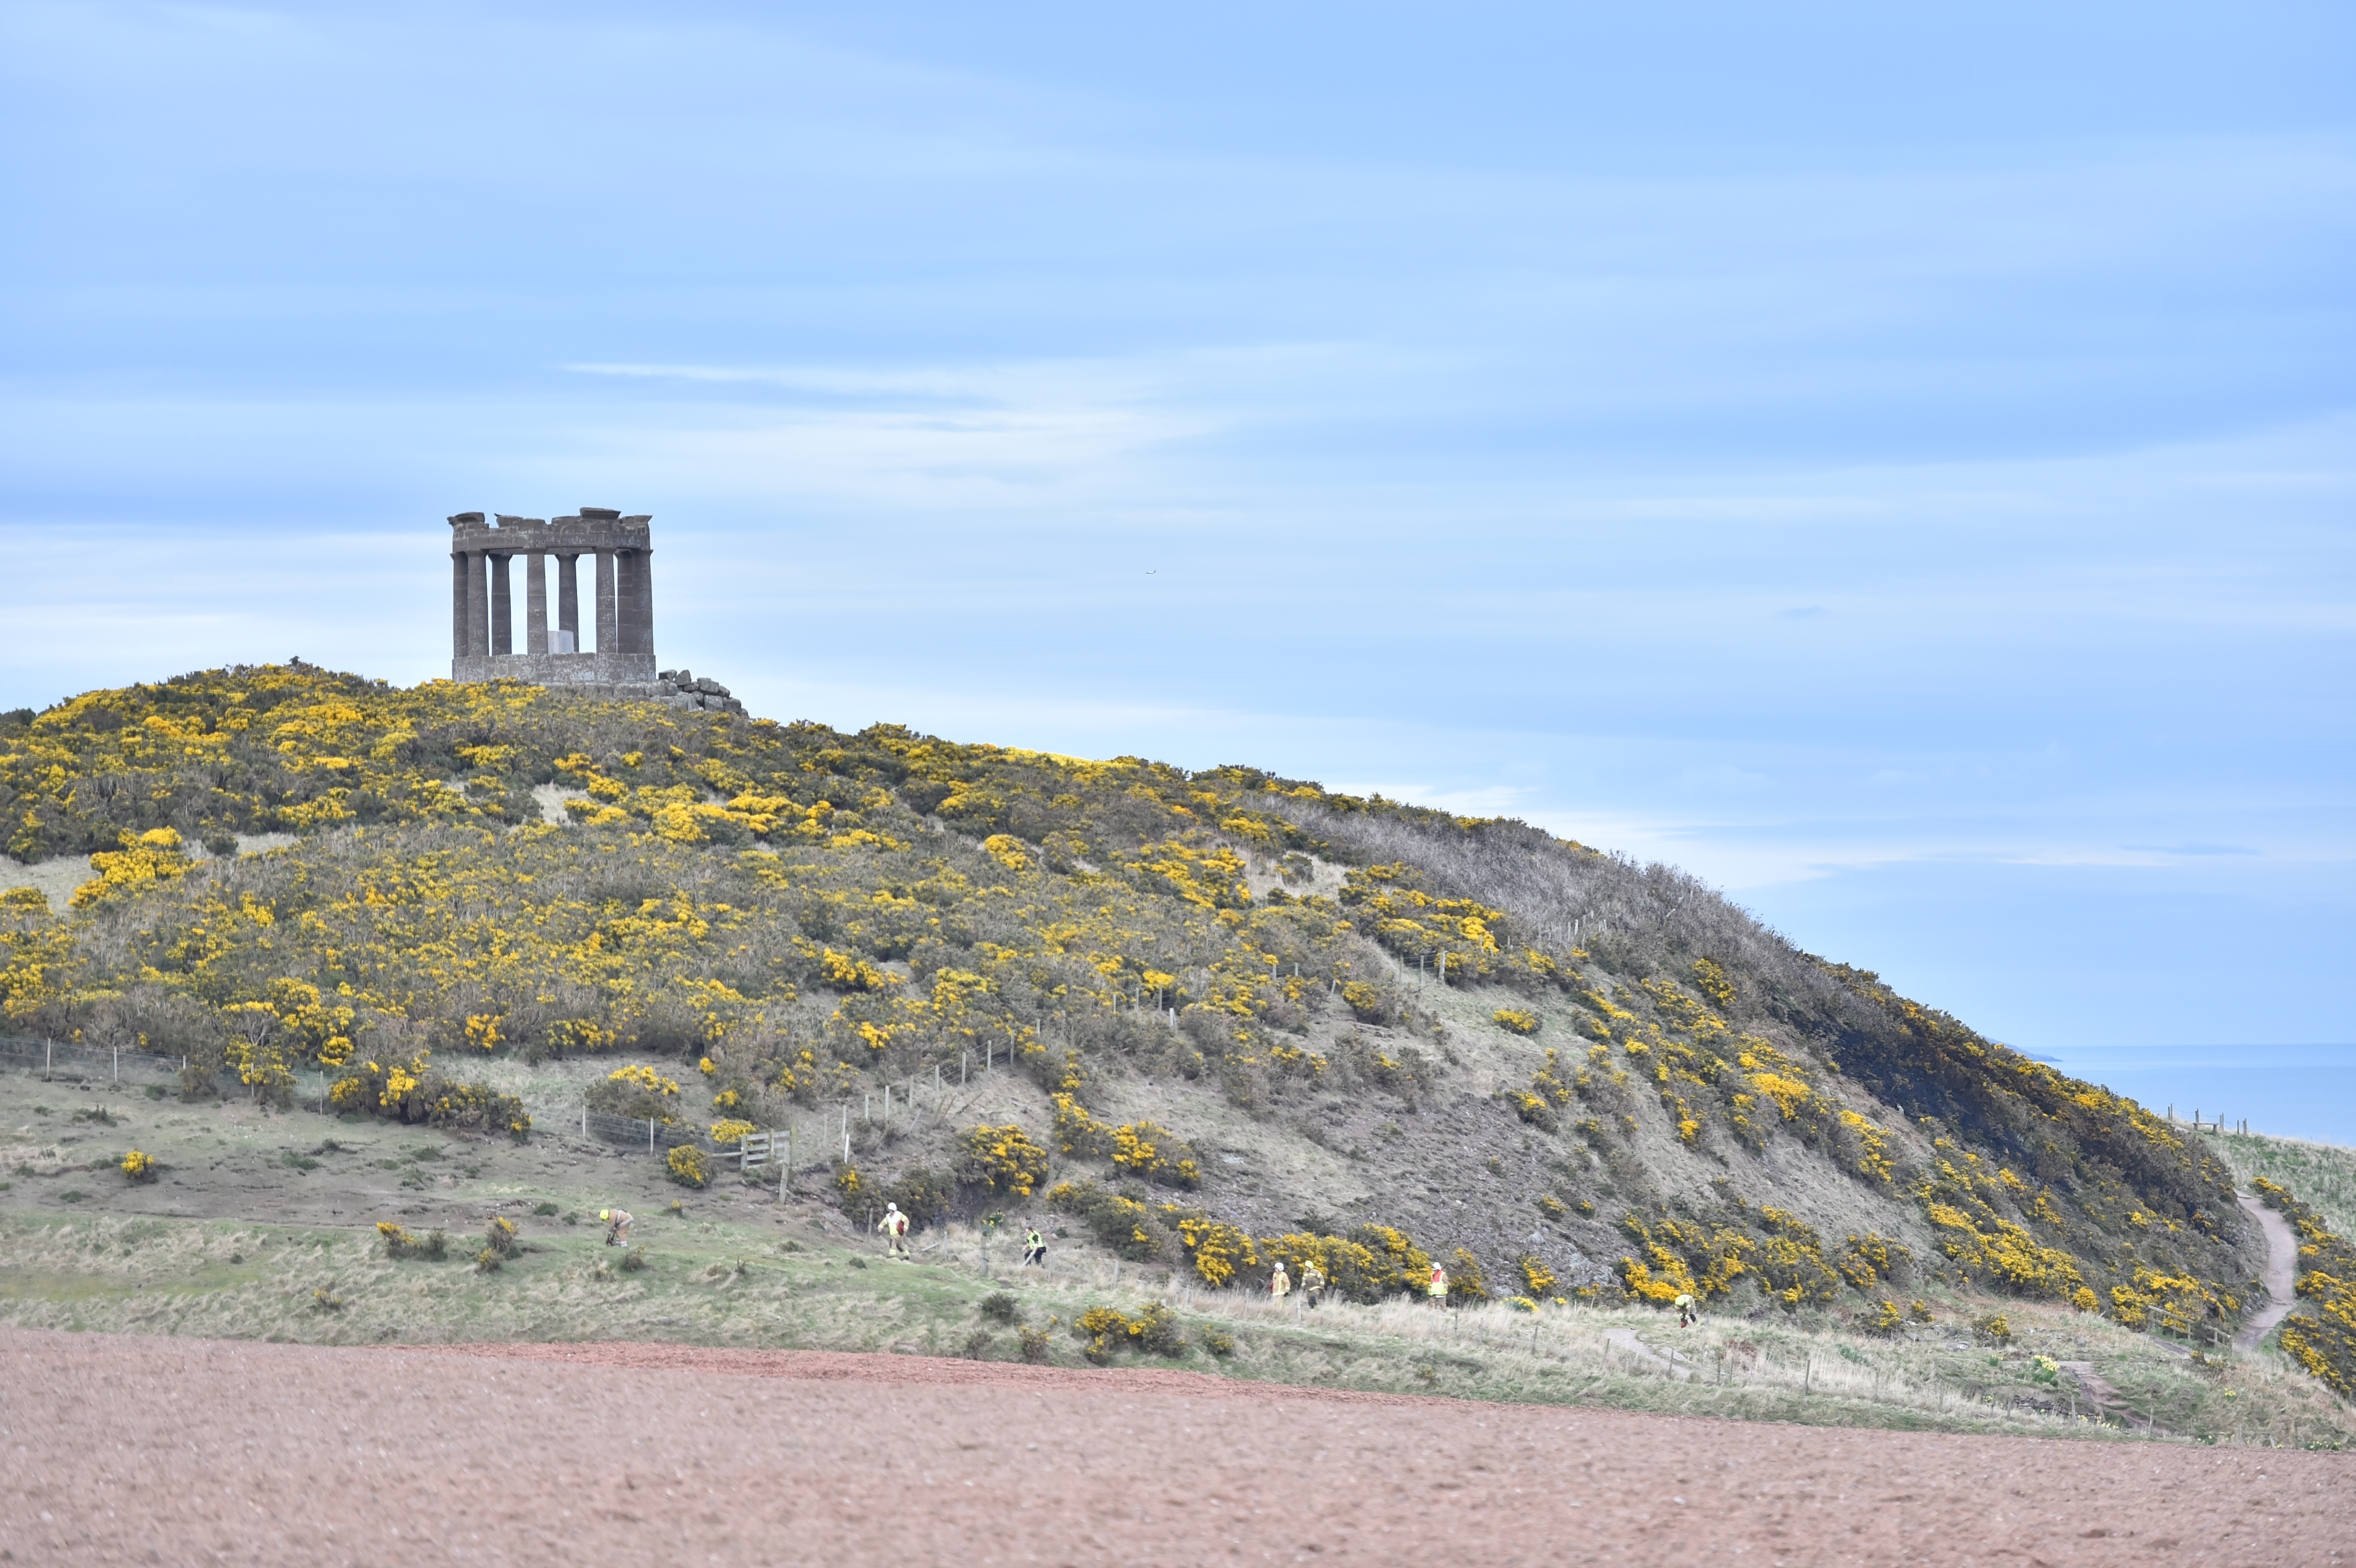 A grass fire at Stonehaven monument.